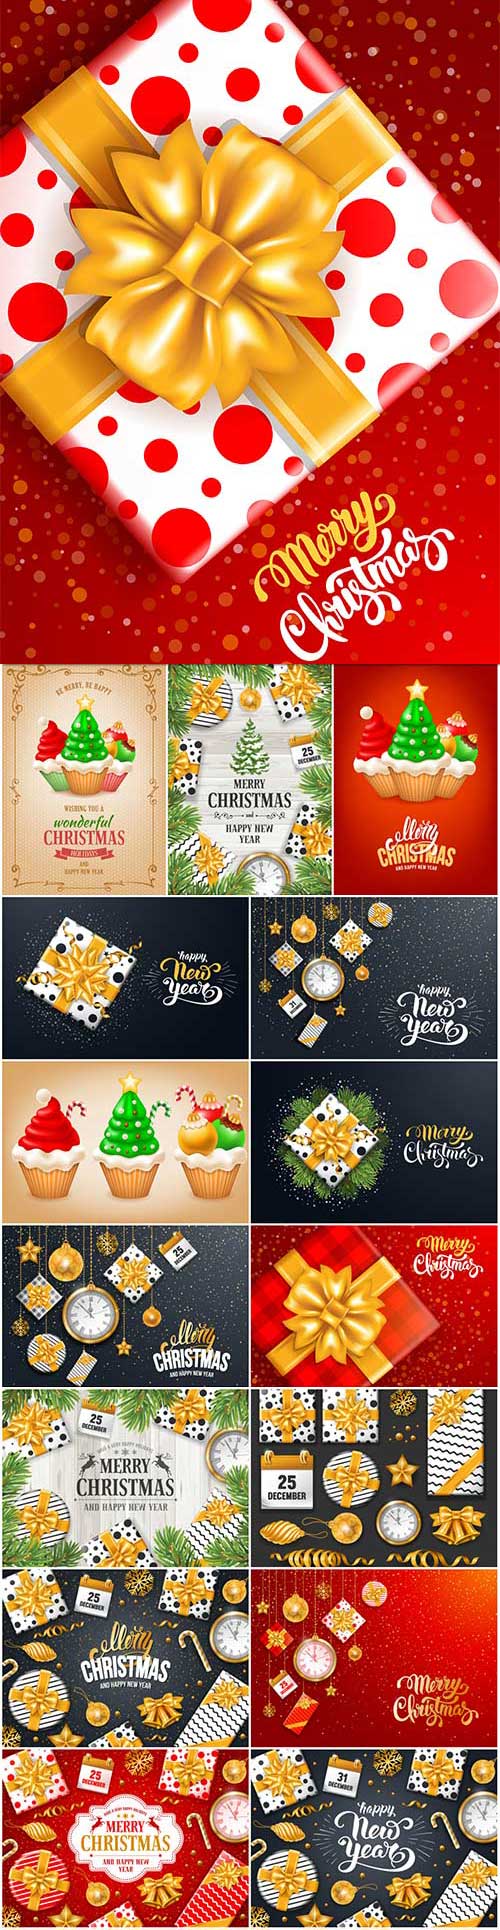 New Year and Christmas vector vol 8